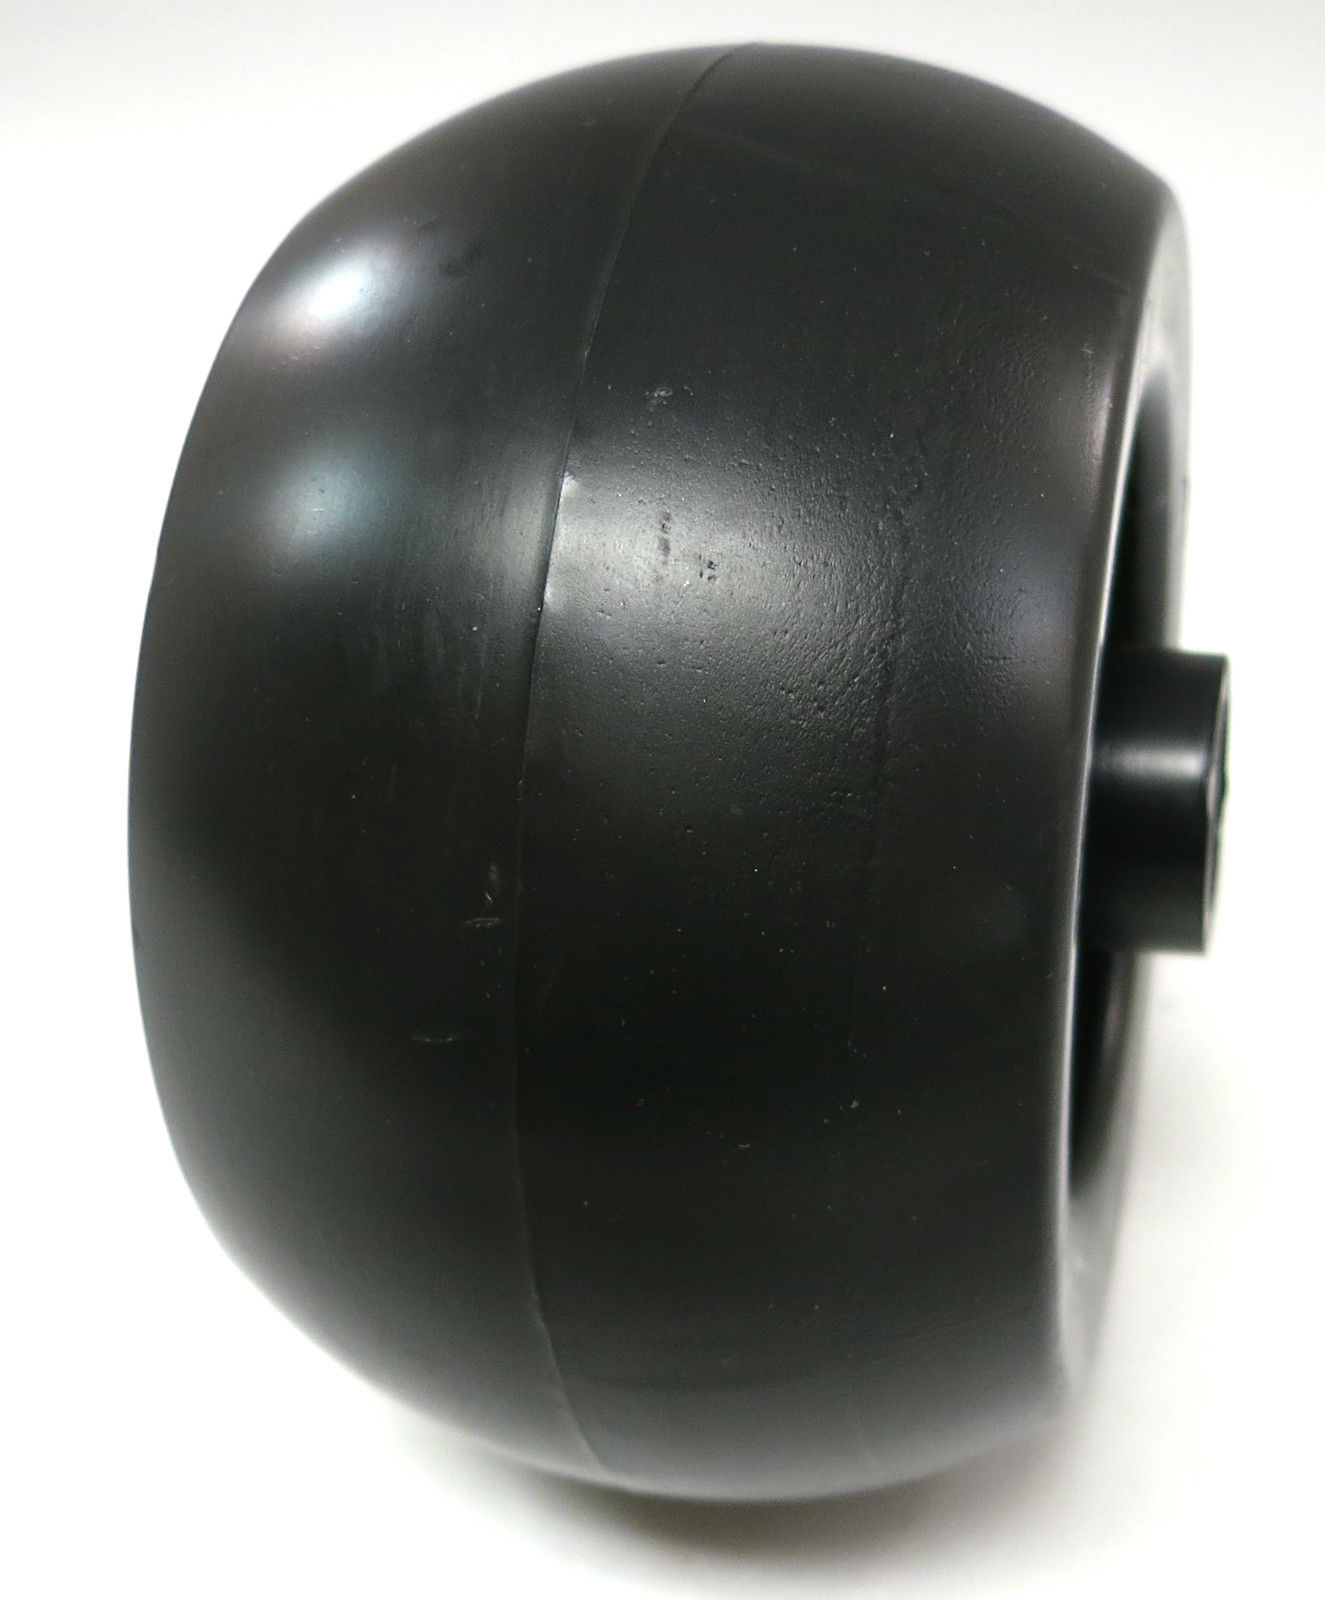 The ROP Shop | (2) Deck Wheel Roller Kits For Stens 210-169 Rotary 10301 Mowers Tractors ZTRs - image 4 of 5